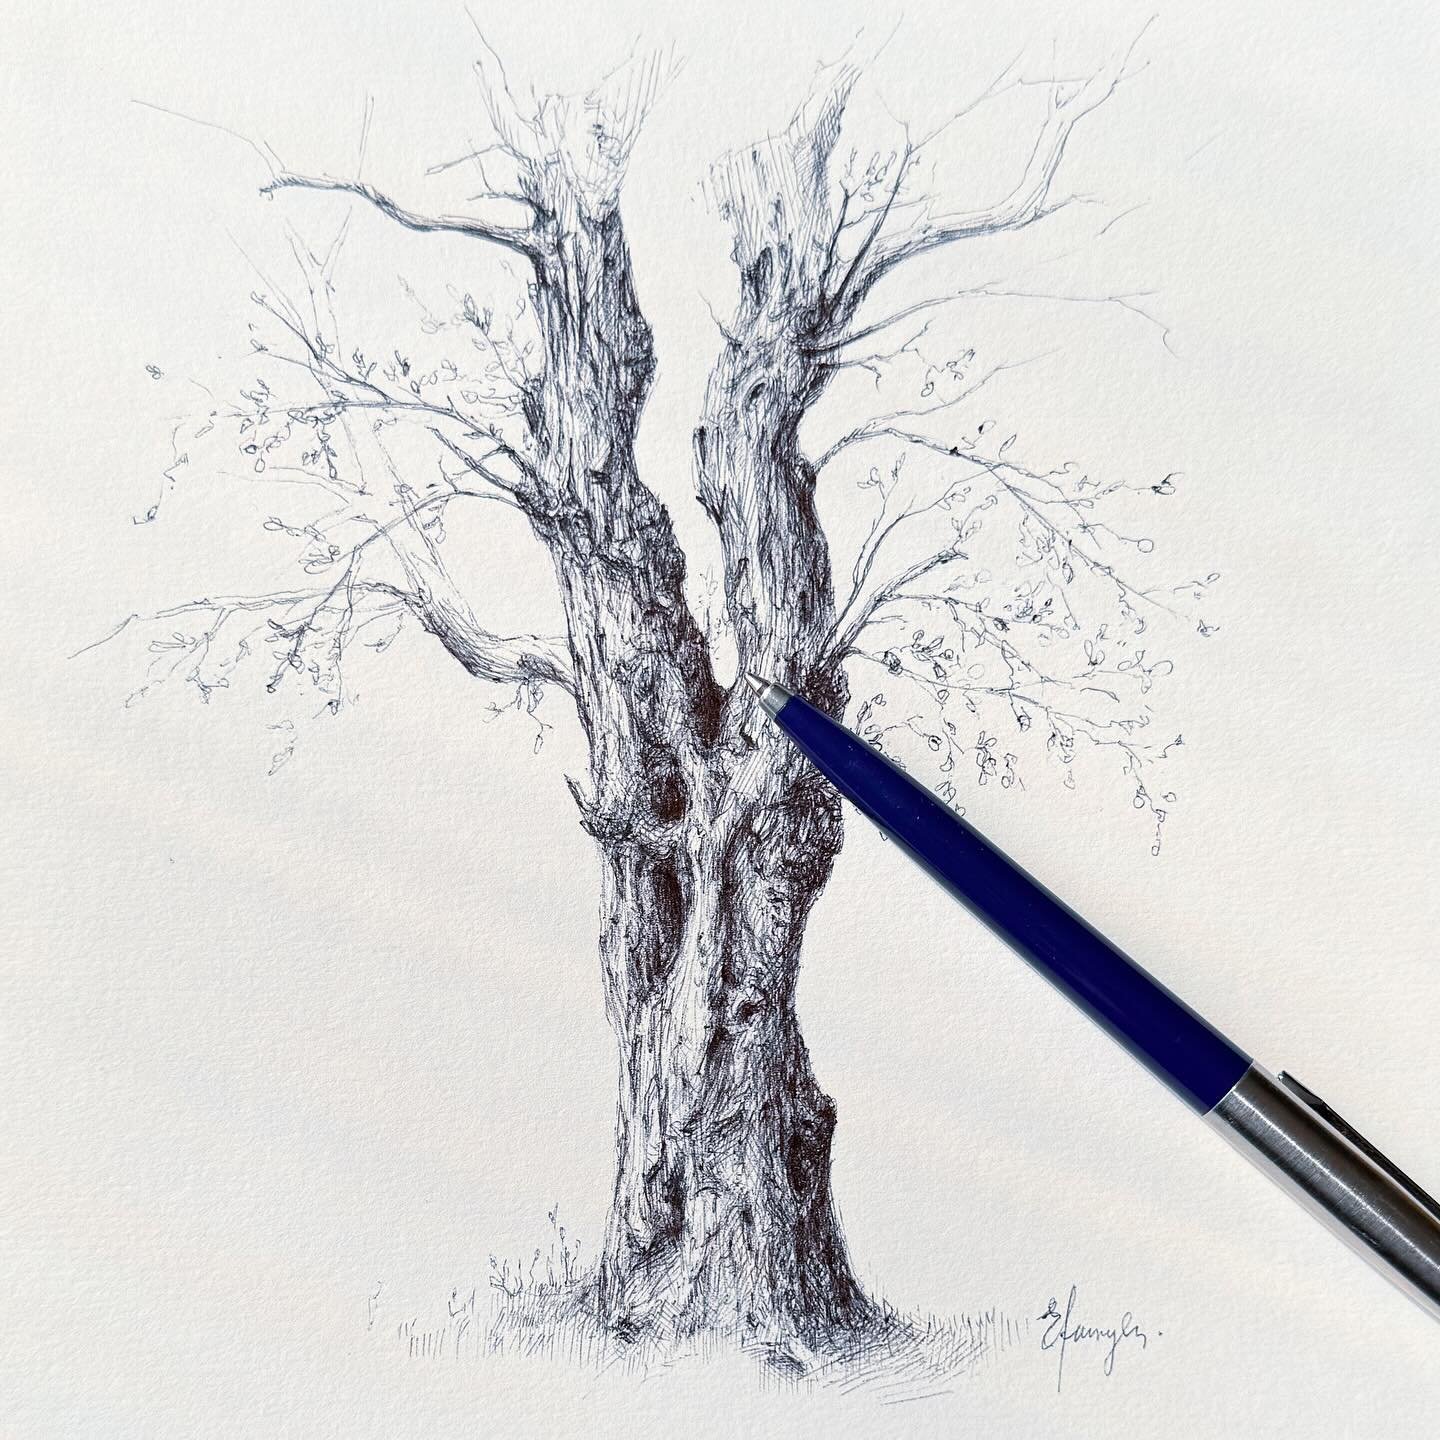 The details&hellip;texture!

Vintage three sketch
7x7 inches, black ballpoint pen on artistic paper. 

This sketch will be available this summer. I will keep you posted on the details.

&bull; ArtDrop, pen sketch, tree sketch, vintage tree drawing, s